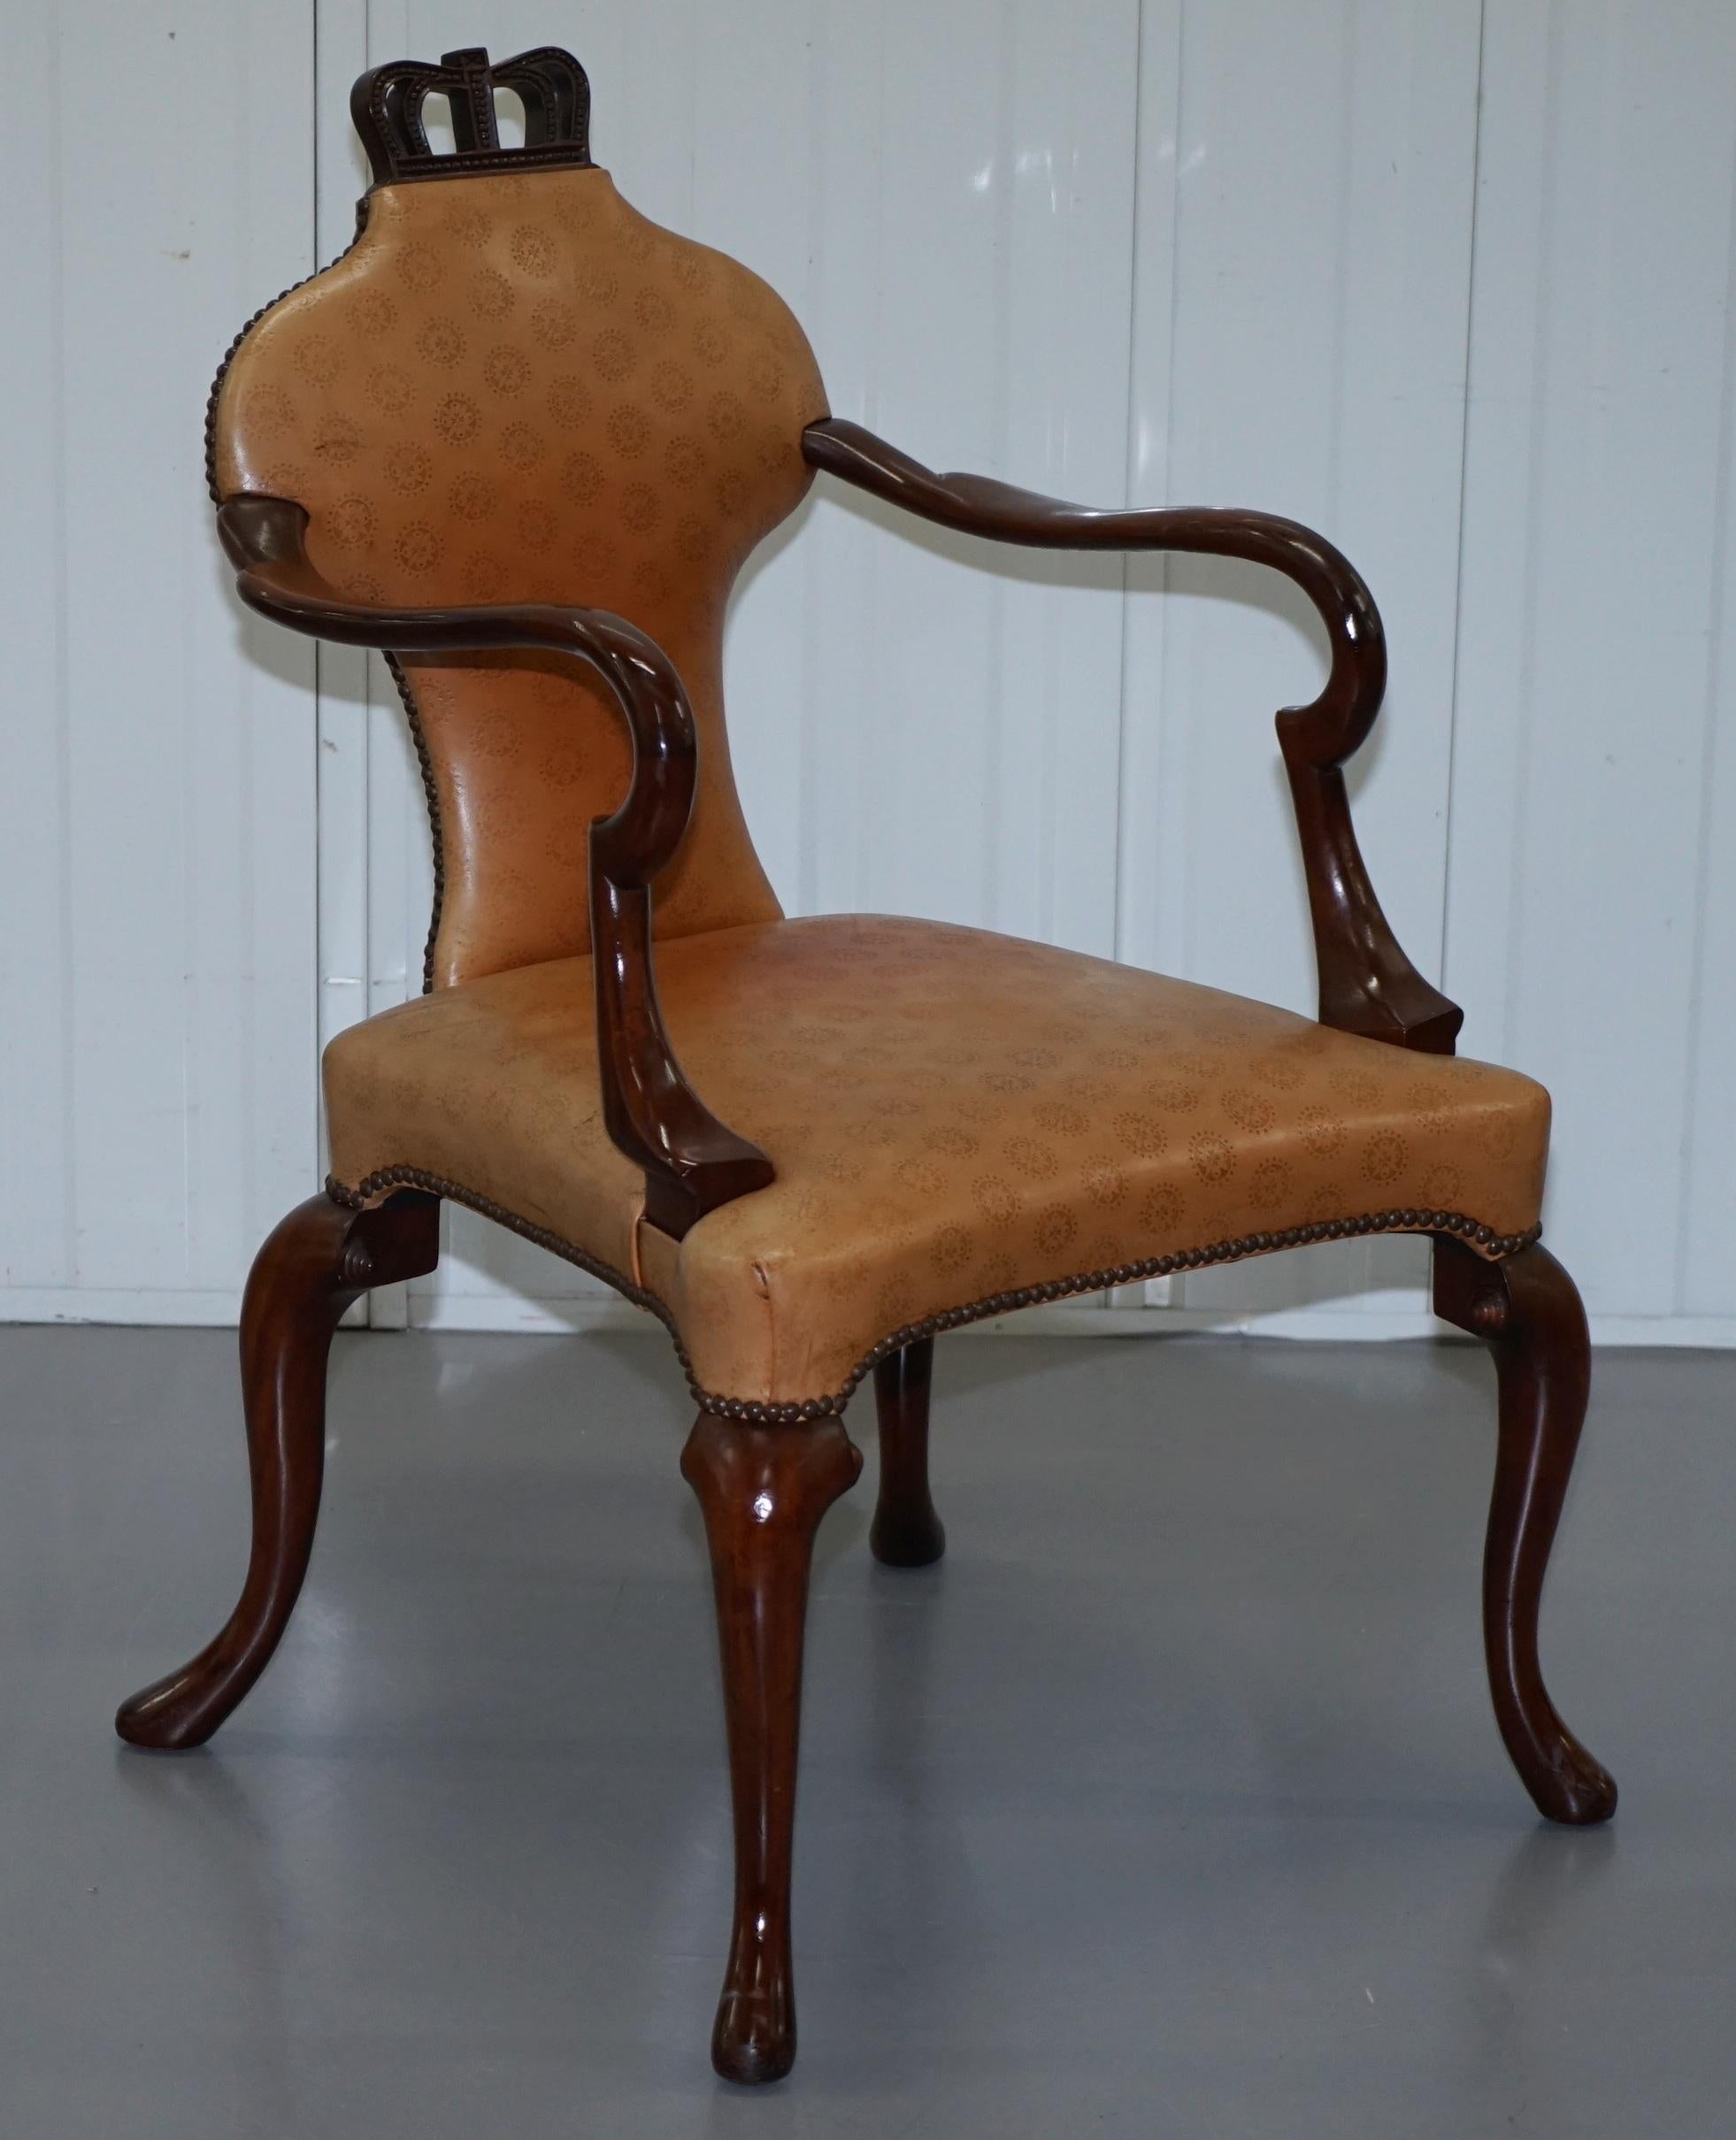 We are delighted to offer for this stunning pair of original Baker Furniture Queen Anne armchairs from the Stately Homes collection with custom embossed leather upholstery

These chairs have been left the natural tan brown colour however they can